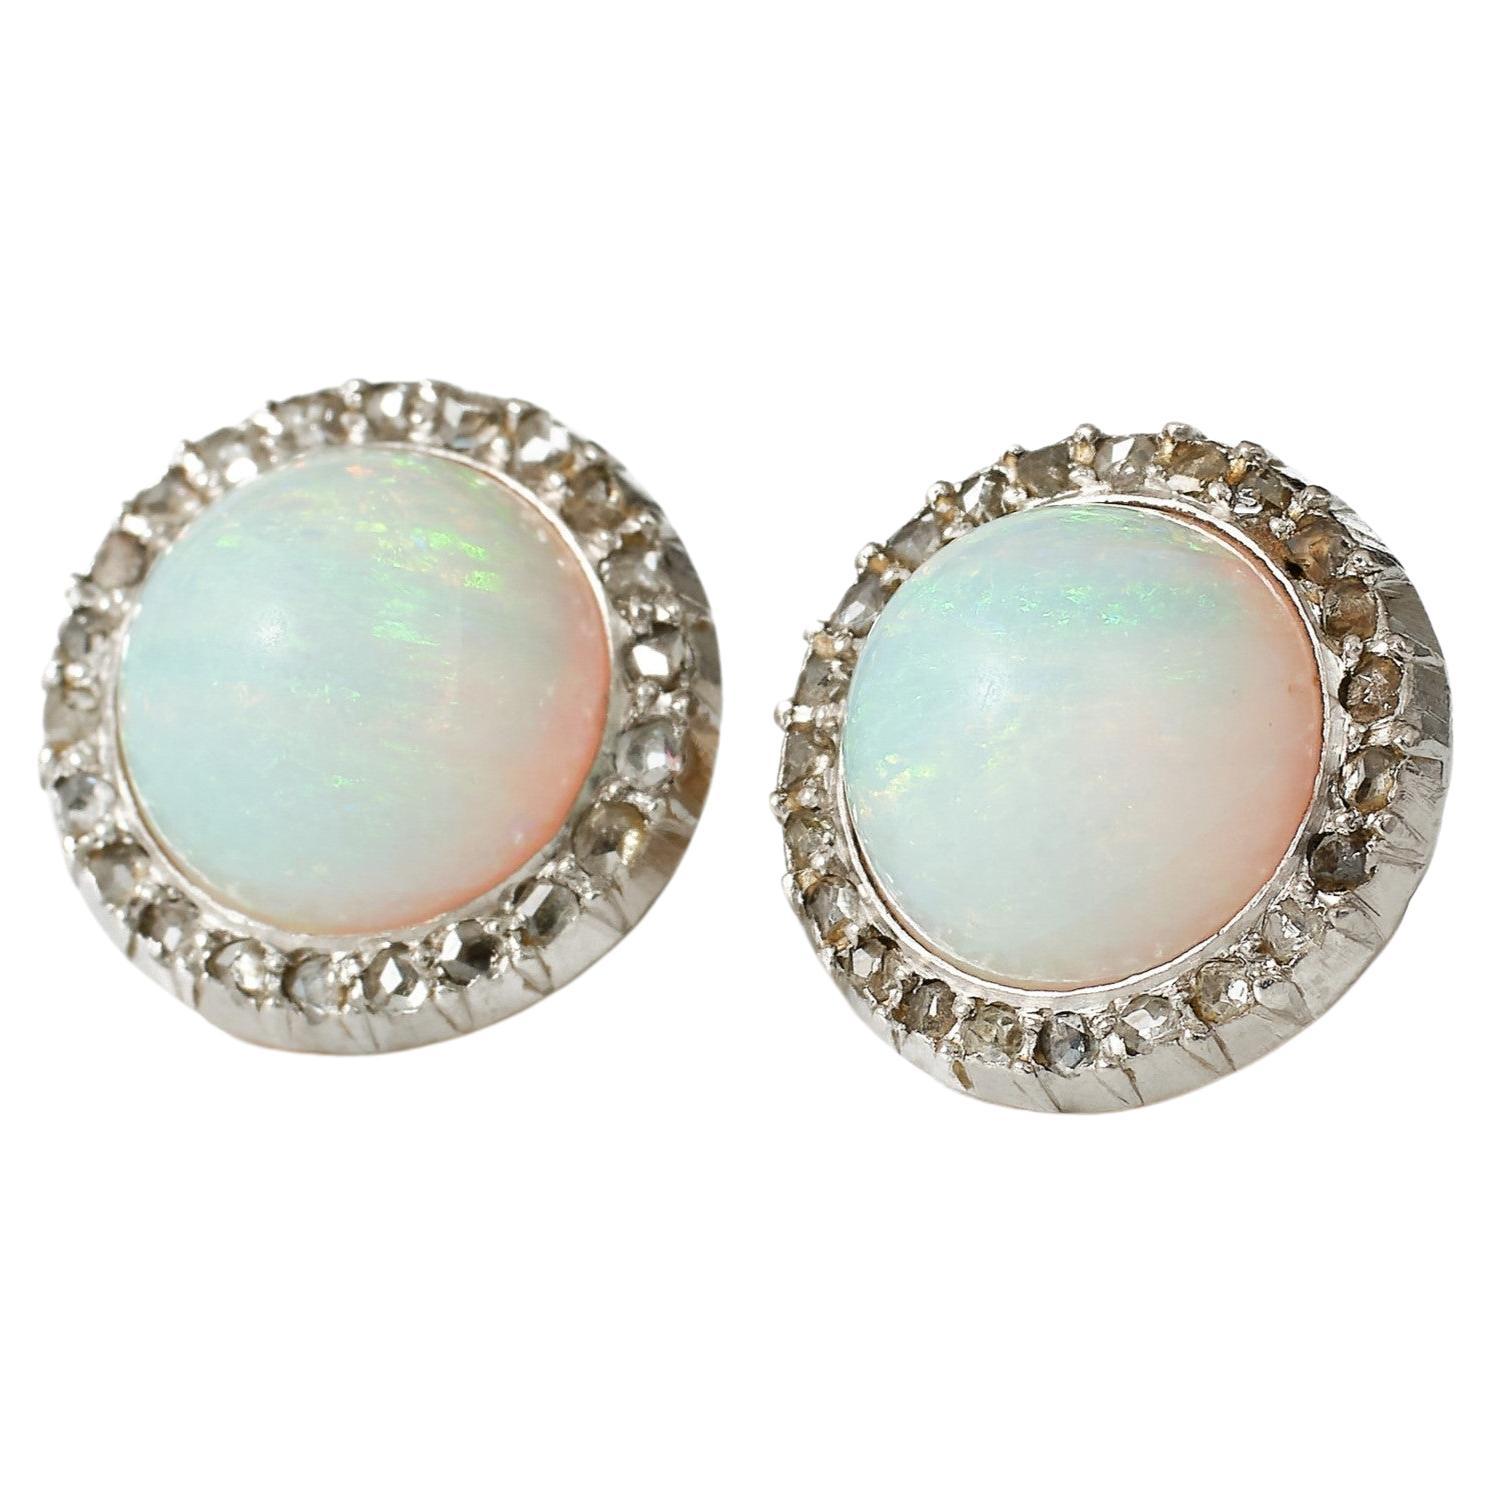 A pair of 19th century opal and diamond cluster earrings. Silver over gold. For Sale